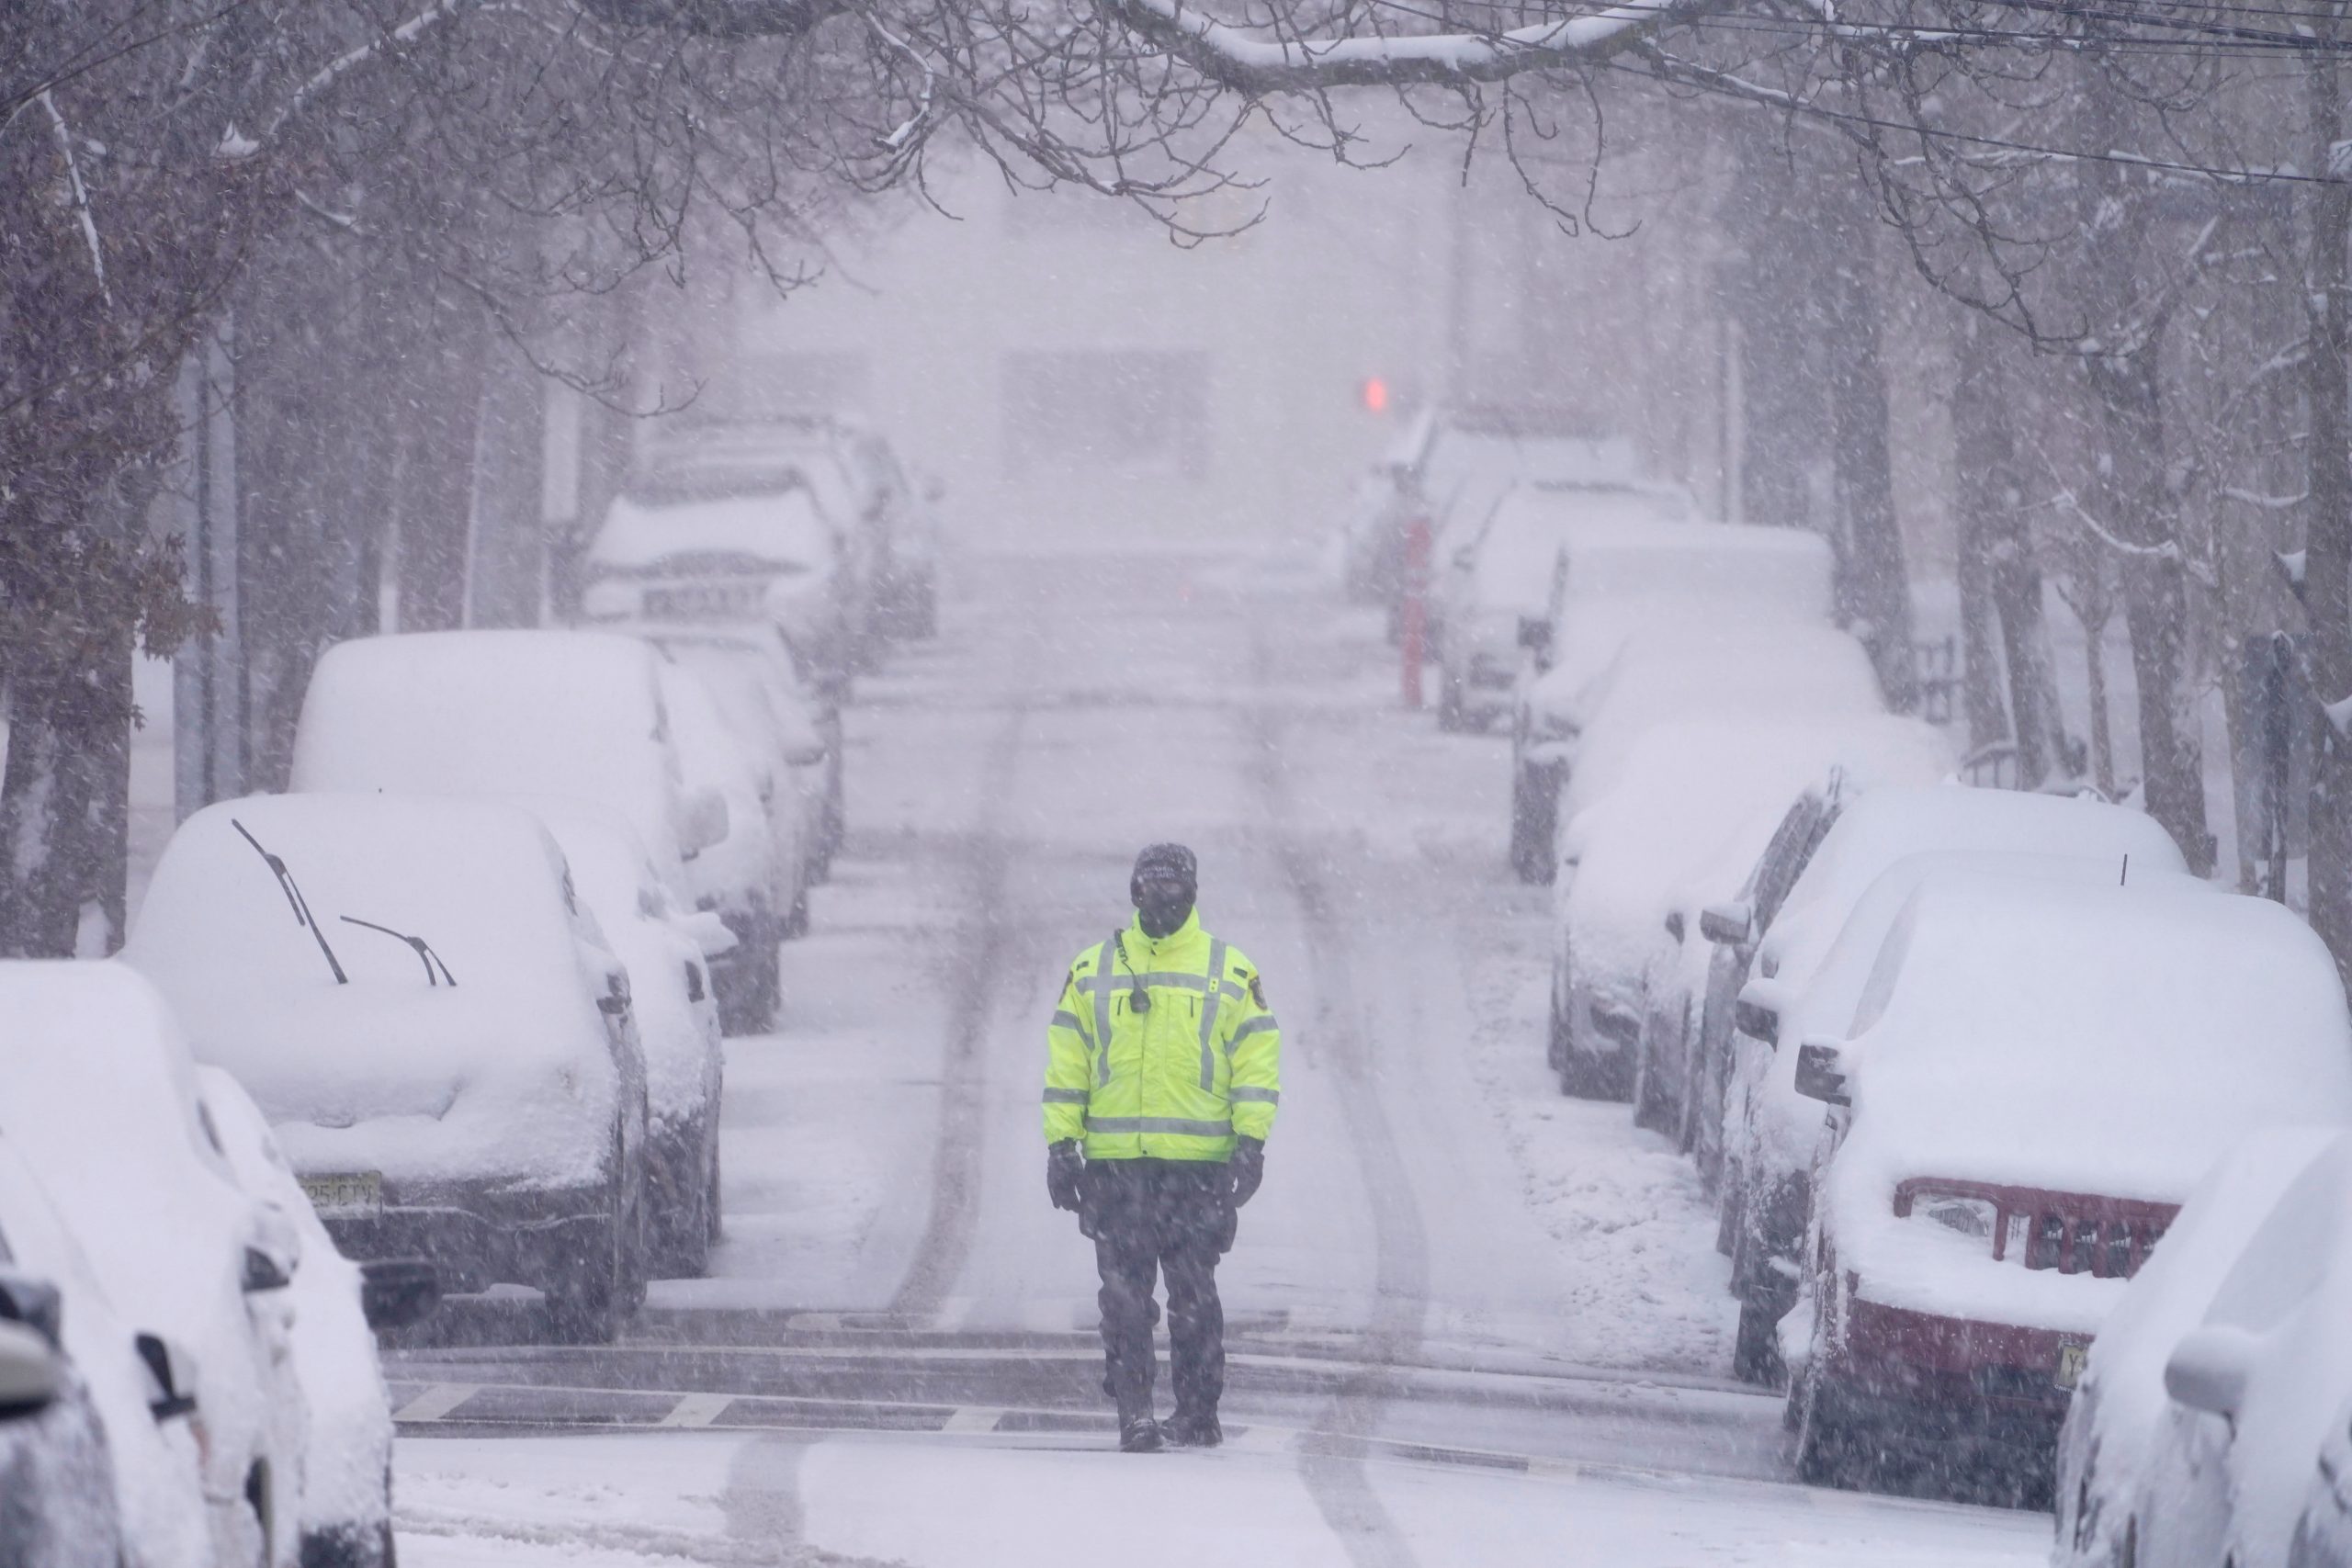 Winter storm triggers power outage in Texas, causes severe temperature drop